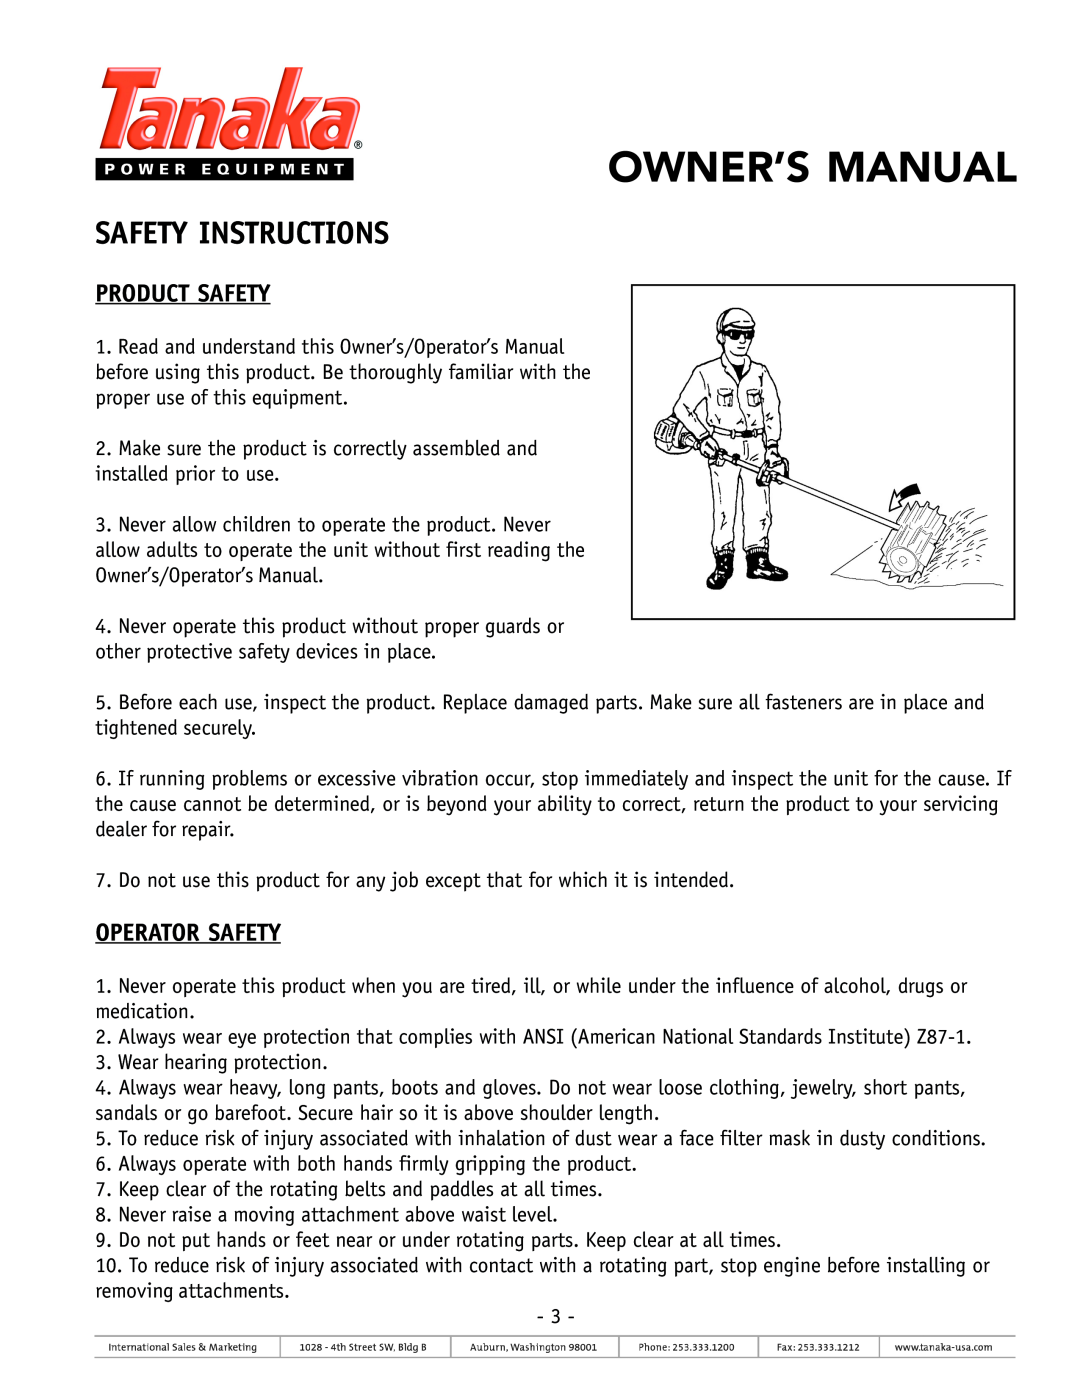 Tanaka TSW-210 owner manual Safety Instructions, Product Safety, Operator Safety 